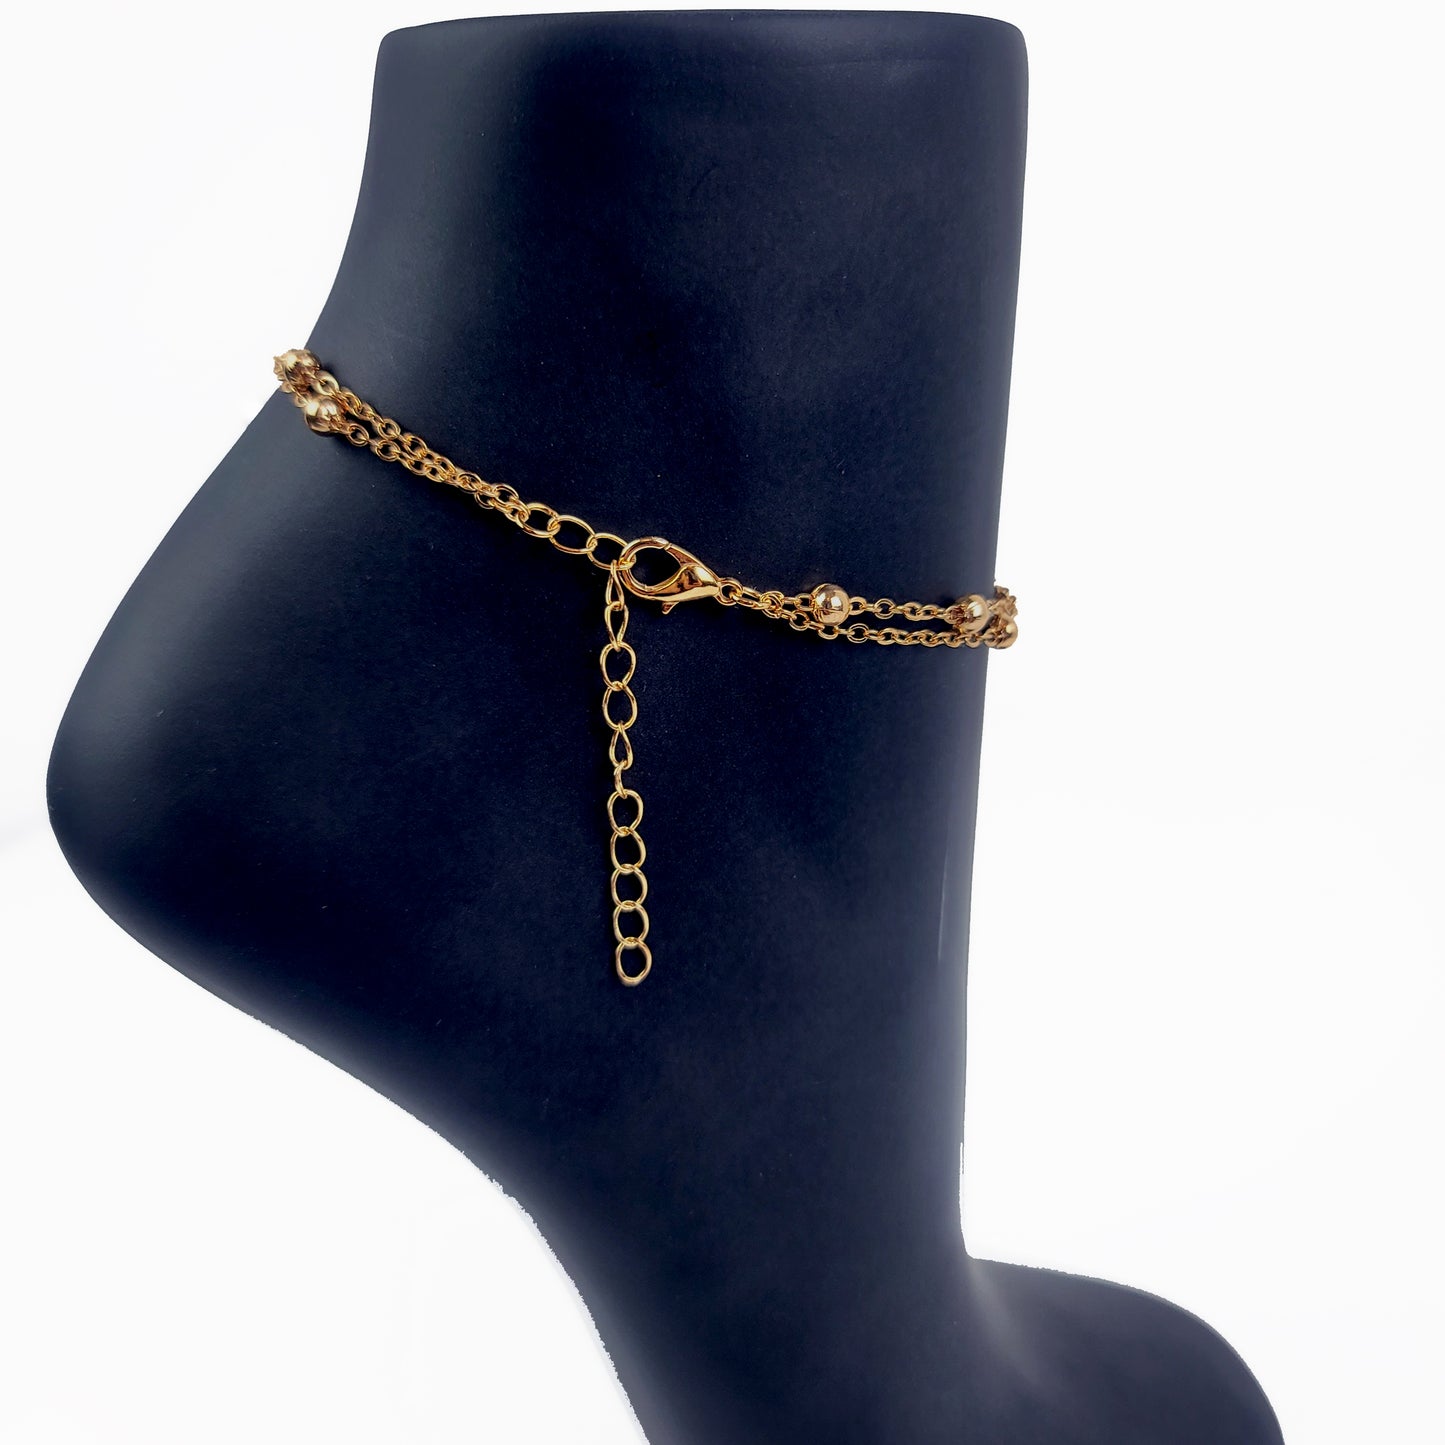 Silver or Gold Infinity Anklet with Pearls